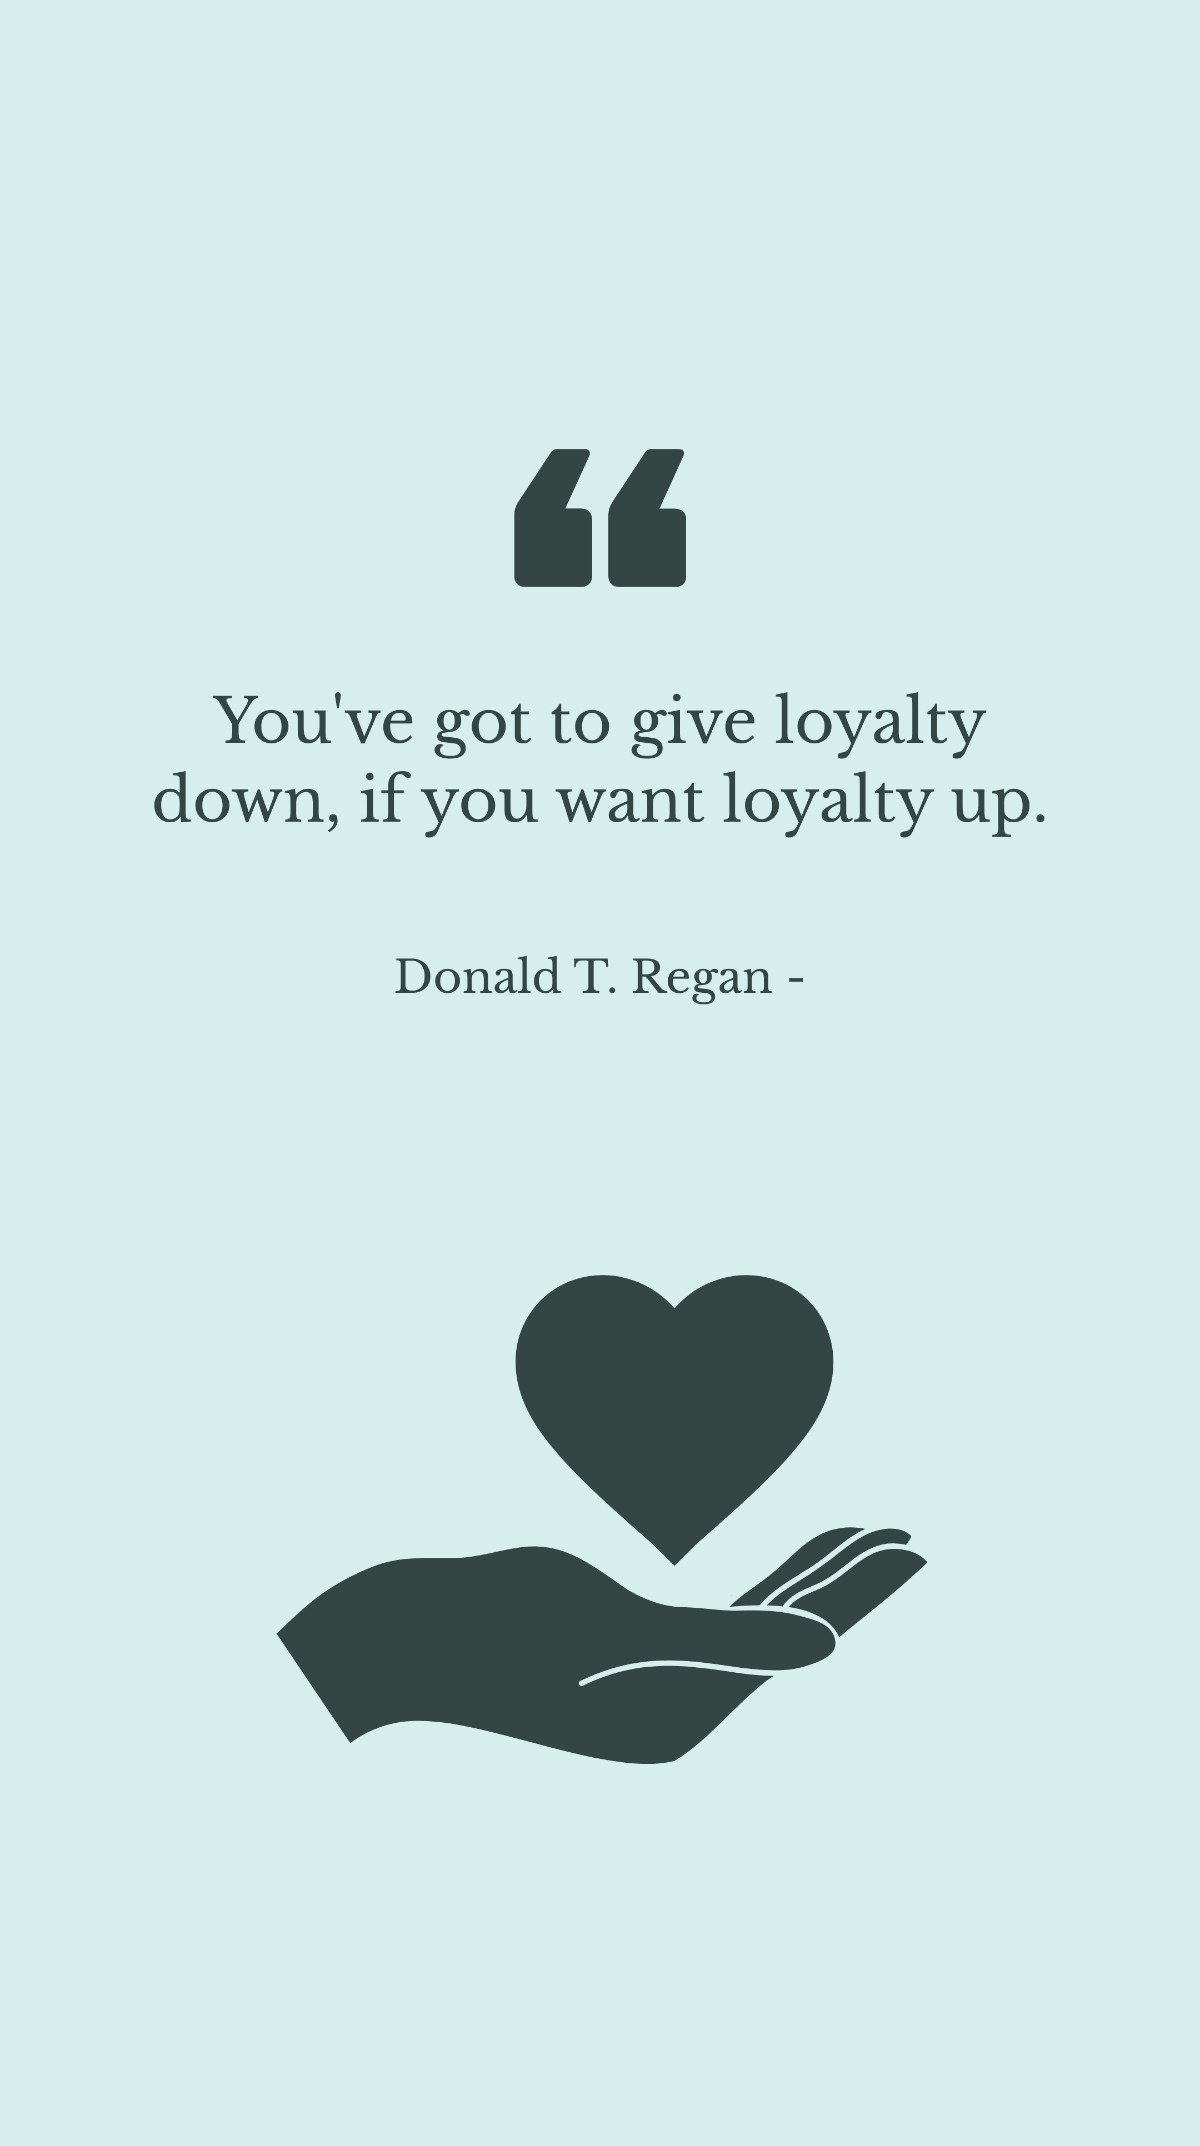 Donald T. Regan - You've got to give loyalty down, if you want loyalty up. Template